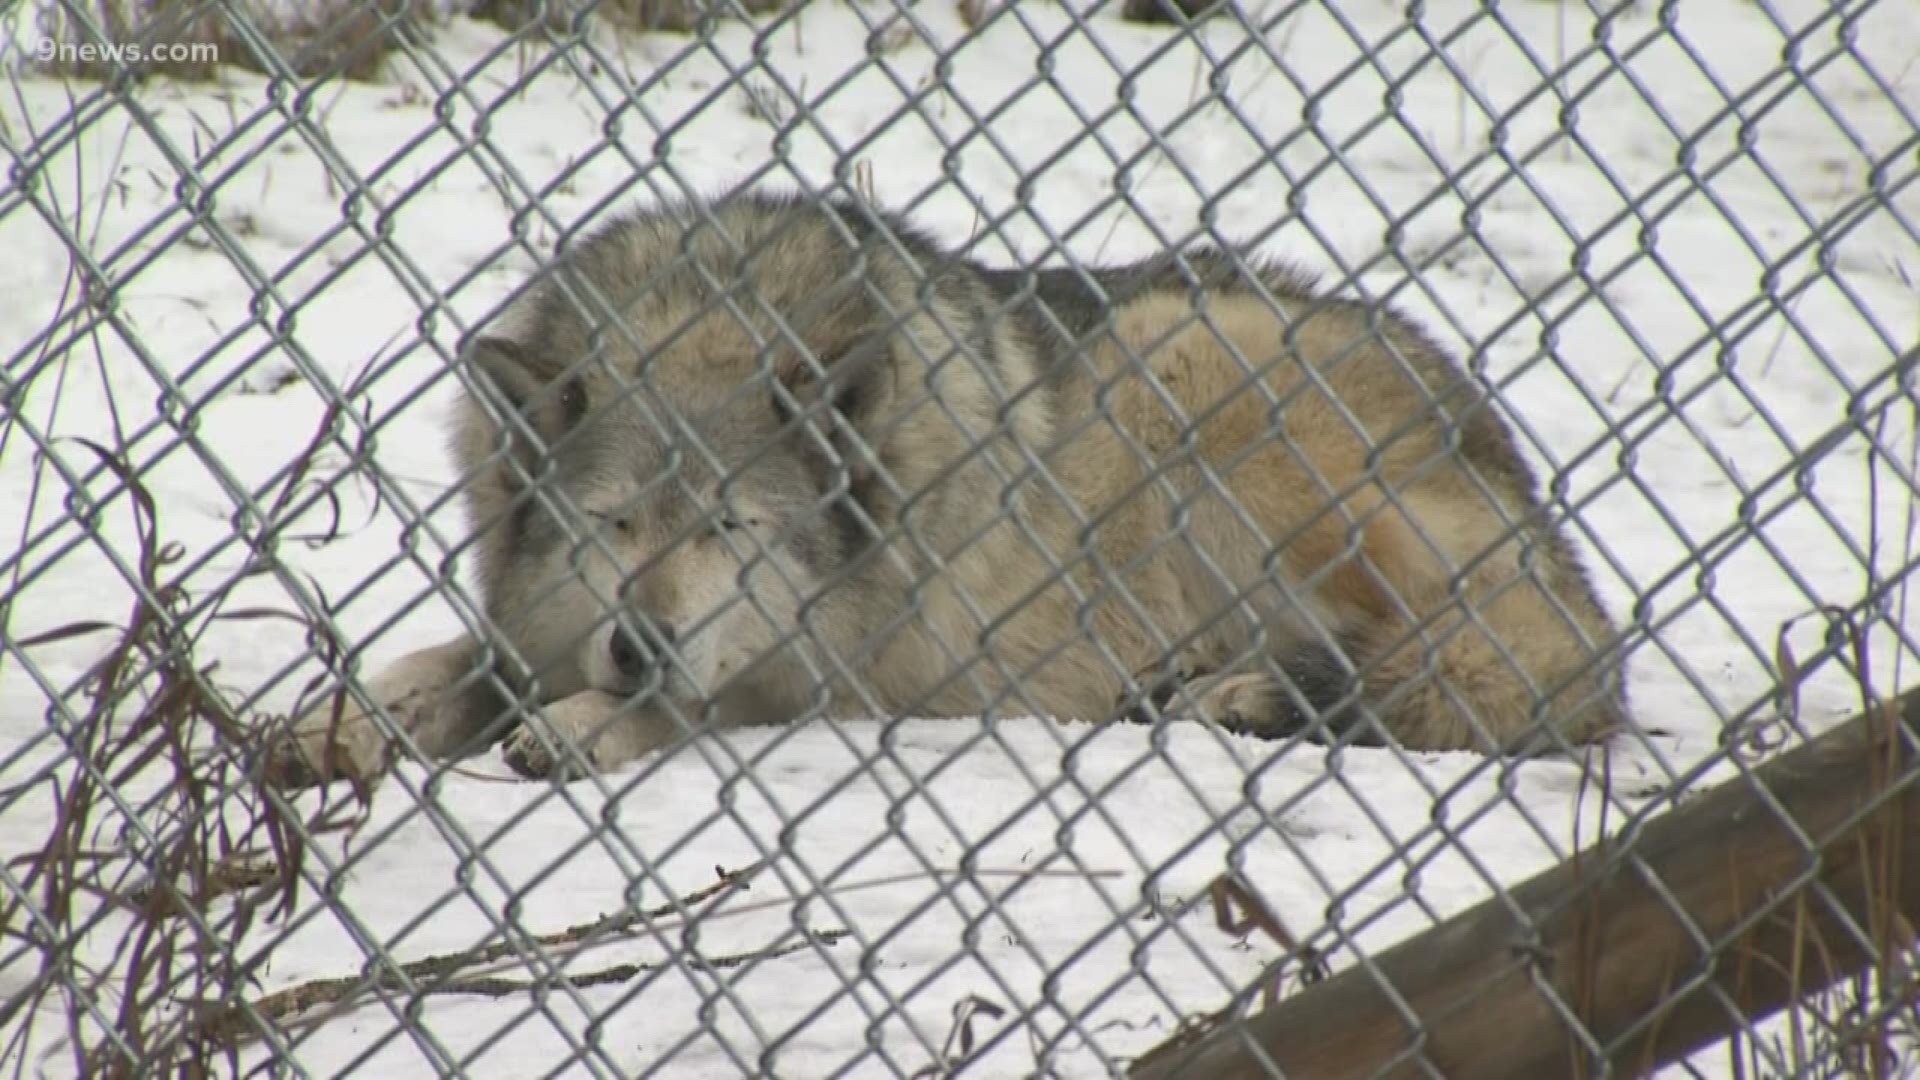 Colorado voters will get to weigh in later this year on a question about the future of wolves in our state.